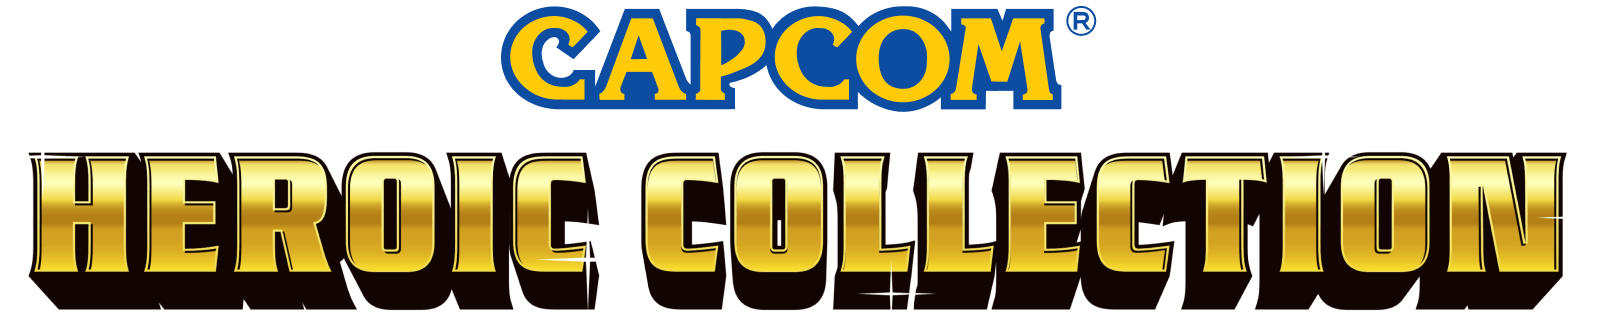 Capcom Heroic Collection